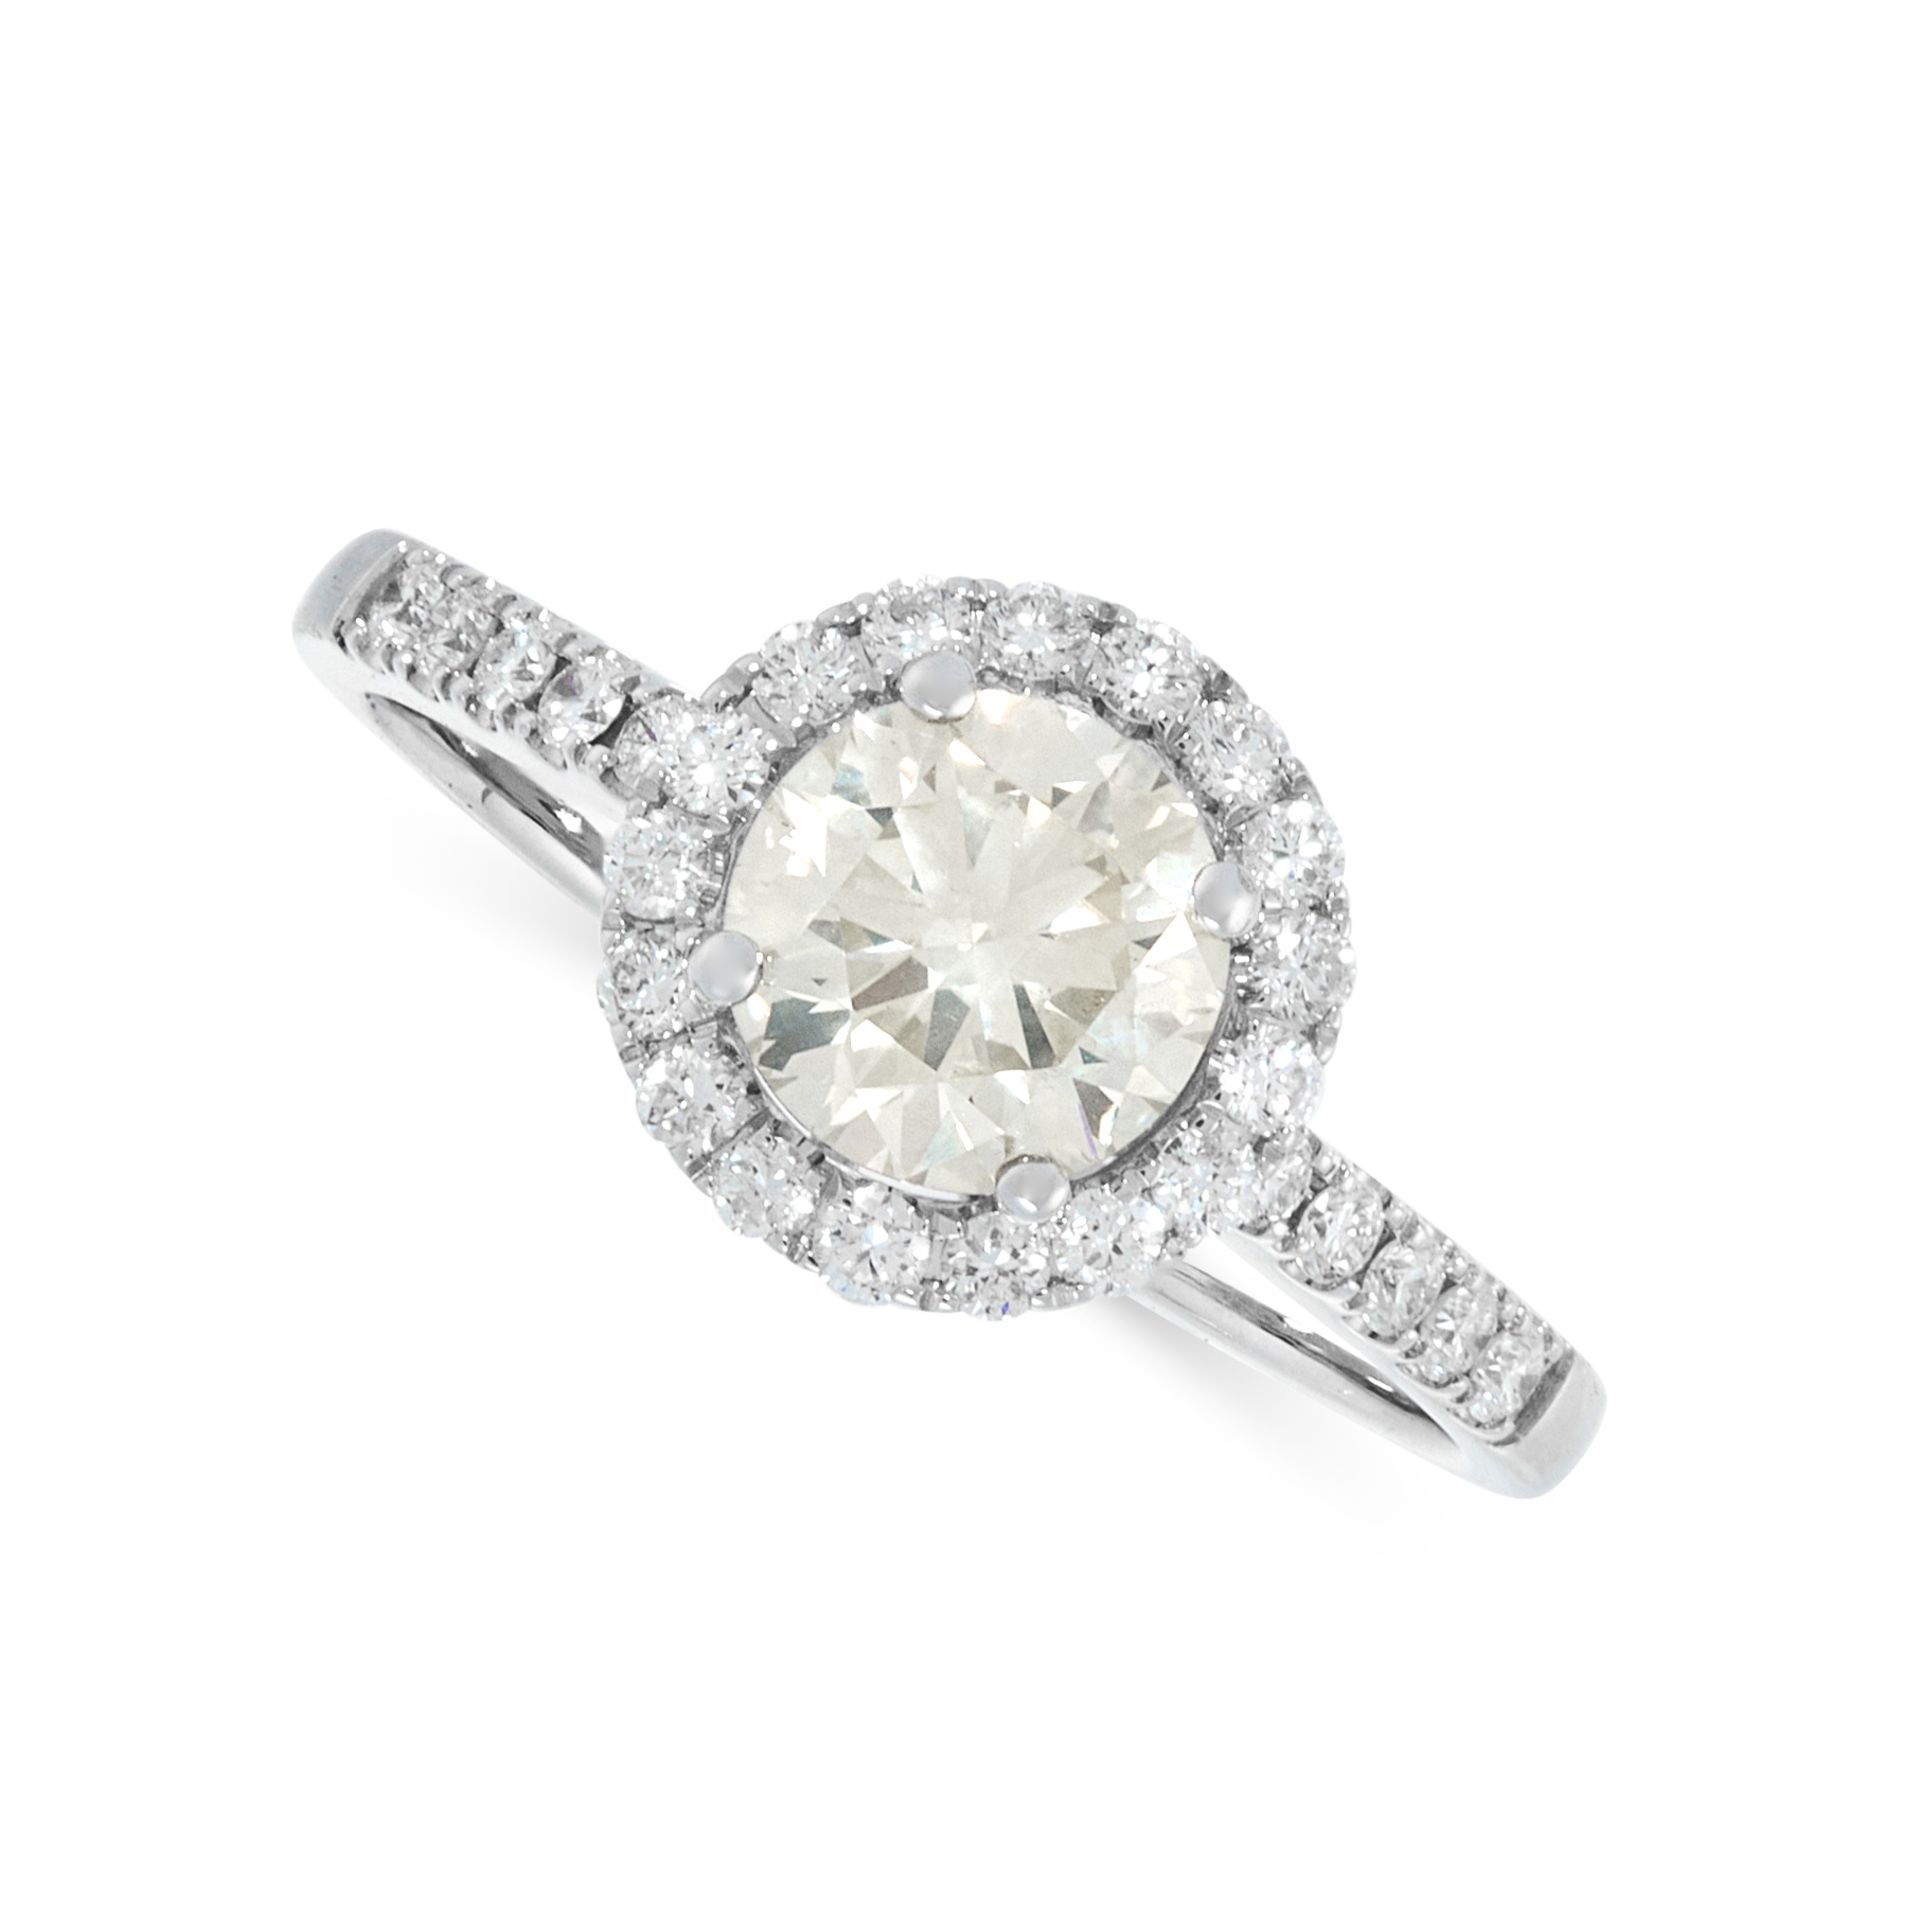 A SOLITAIRE DIAMOND ENGAGEMENT RING in 18ct white gold, set with a central round cut diamond of 1.02